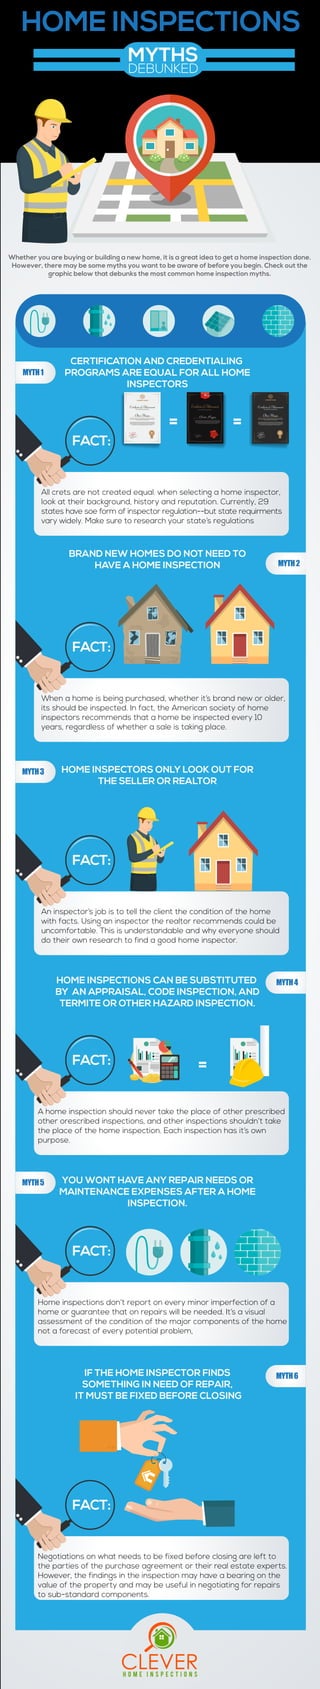 Whether you are buying or building a new home, it is a great idea to get a home inspection done.
However, there may be some myths you want to be aware of before you begin. Check out the
graphic below that debunks the most common home inspection myths.
CERTIFICATION AND CREDENTIALING
PROGRAMS ARE EQUAL FOR ALL HOME
INSPECTORS
BRAND NEW HOMES DO NOT NEED TO
HAVE A HOME INSPECTION
HOME INSPECTORS ONLY LOOK OUT FOR
THE SELLER OR REALTOR
All crets are not created equal. when selecting a home inspector,
look at their background, history and reputation. Currently, 29
states have soe form of inspector regulation--but state requirments
vary widely. Make sure to research your state’s regulations
FACT:
When a home is being purchased, whether it’s brand new or older,
its should be inspected. In fact, the American society of home
inspectors recommends that a home be inspected every 10
years, regardless of whether a sale is taking place.
FACT:
An inspector’s job is to tell the client the condition of the home
with facts. Using an inspector the realtor recommends could be
uncomfortable. This is understandable and why everyone should
do their own research to find a good home inspector.
FACT:
= =
MYTH1
MYTH3
MYTH5
MYTH2
HOME INSPECTIONS CAN BE SUBSTITUTED
BY AN APPRAISAL, CODE INSPECTION, AND
TERMITE OR OTHER HAZARD INSPECTION.
YOU WONT HAVE ANY REPAIR NEEDS OR
MAINTENANCE EXPENSES AFTER A HOME
INSPECTION.
IF THE HOME INSPECTOR FINDS
SOMETHING IN NEED OF REPAIR,
IT MUST BE FIXED BEFORE CLOSING
A home inspection should never take the place of other prescribed
other orescribed inspections, and other inspections shouldn’t take
the place of the home inspection. Each inspection has it’s own
purpose.
FACT:
Home inspections don’t report on every minor imperfection of a
home or guarantee that on repairs will be needed. It’s a visual
assessment of the condition of the major components of the home
not a forecast of every potential problem,
FACT:
Negotiations on what needs to be fixed before closing are left to
the parties of the purchase agreement or their real estate experts.
However, the findings in the inspection may have a bearing on the
value of the property and may be useful in negotiating for repairs
to sub-standard components.
FACT:
MYTH4
MYTH6
=
HOME INSPECTIONS
MYTHS
DEBUNKED
 